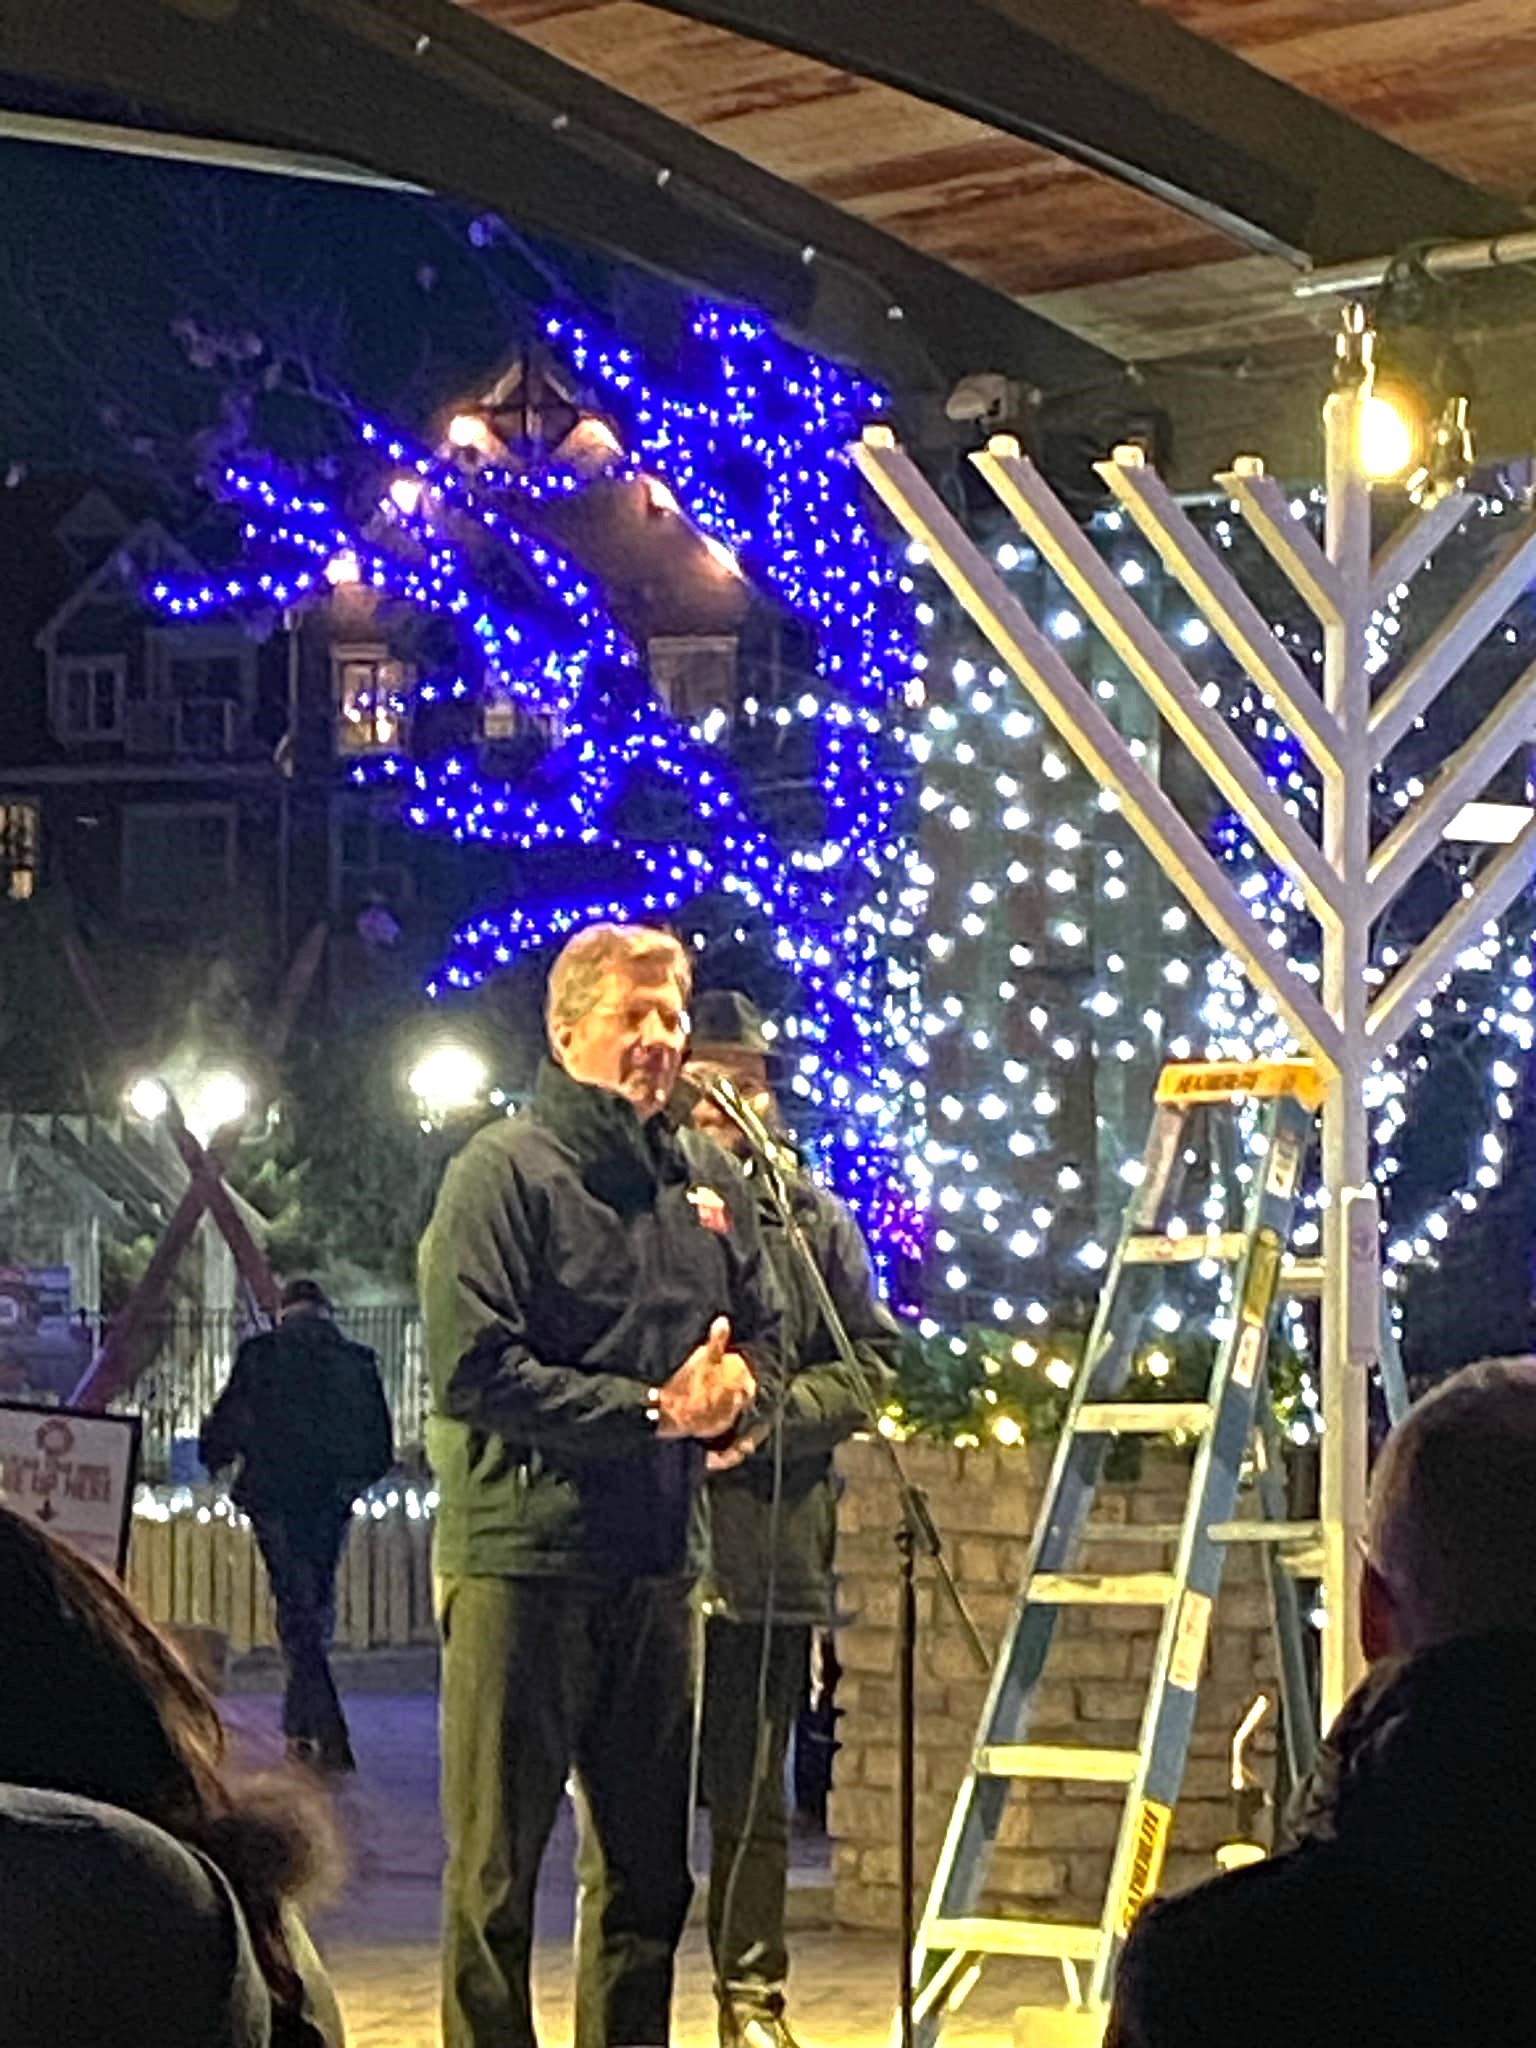 Brian Saunderson, MPP for Simcoe-Grey provides a welcome to all in attendance at the menorah lighting ceremony.